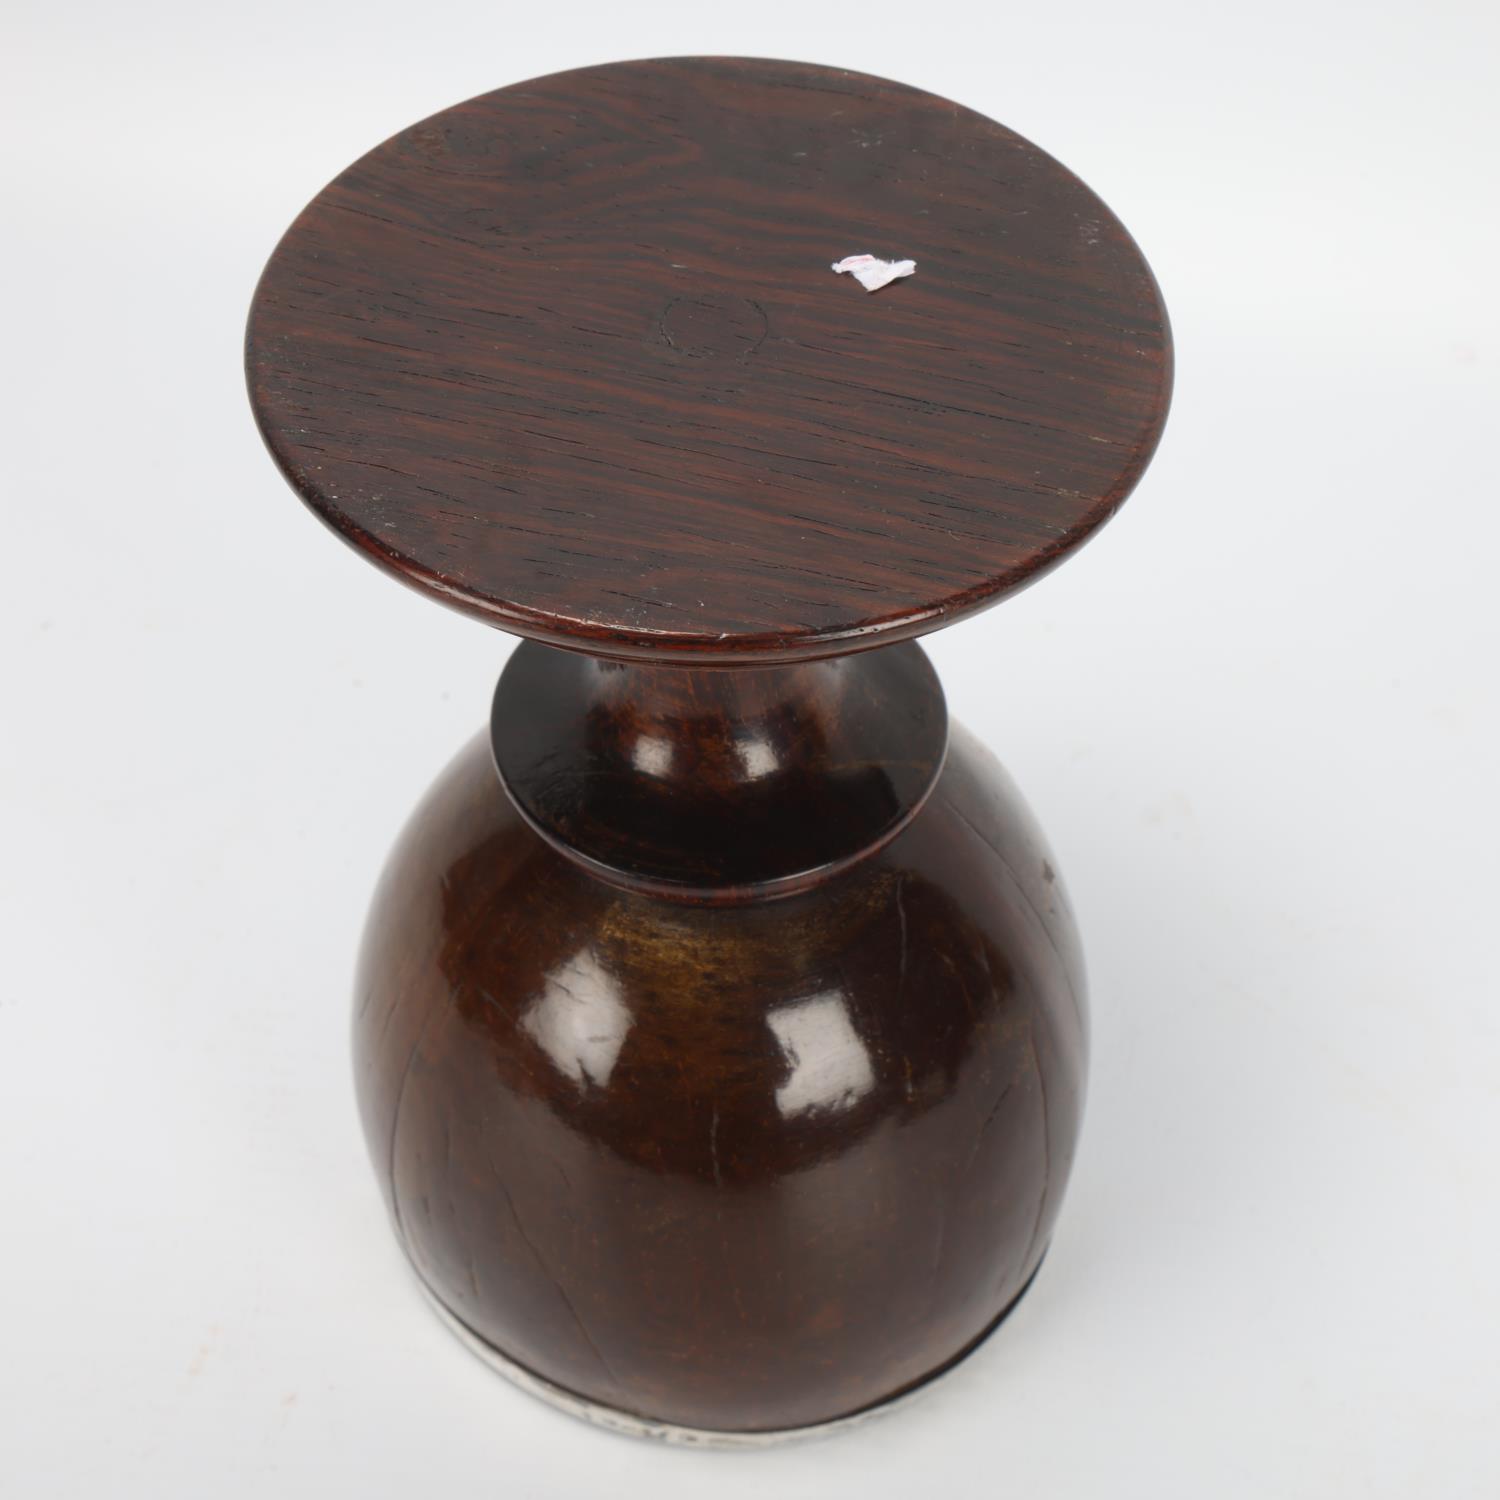 Antique coconut cup, 18th or 19th century, unmarked white metal mounts on rosewood base, height 14. - Image 3 of 3